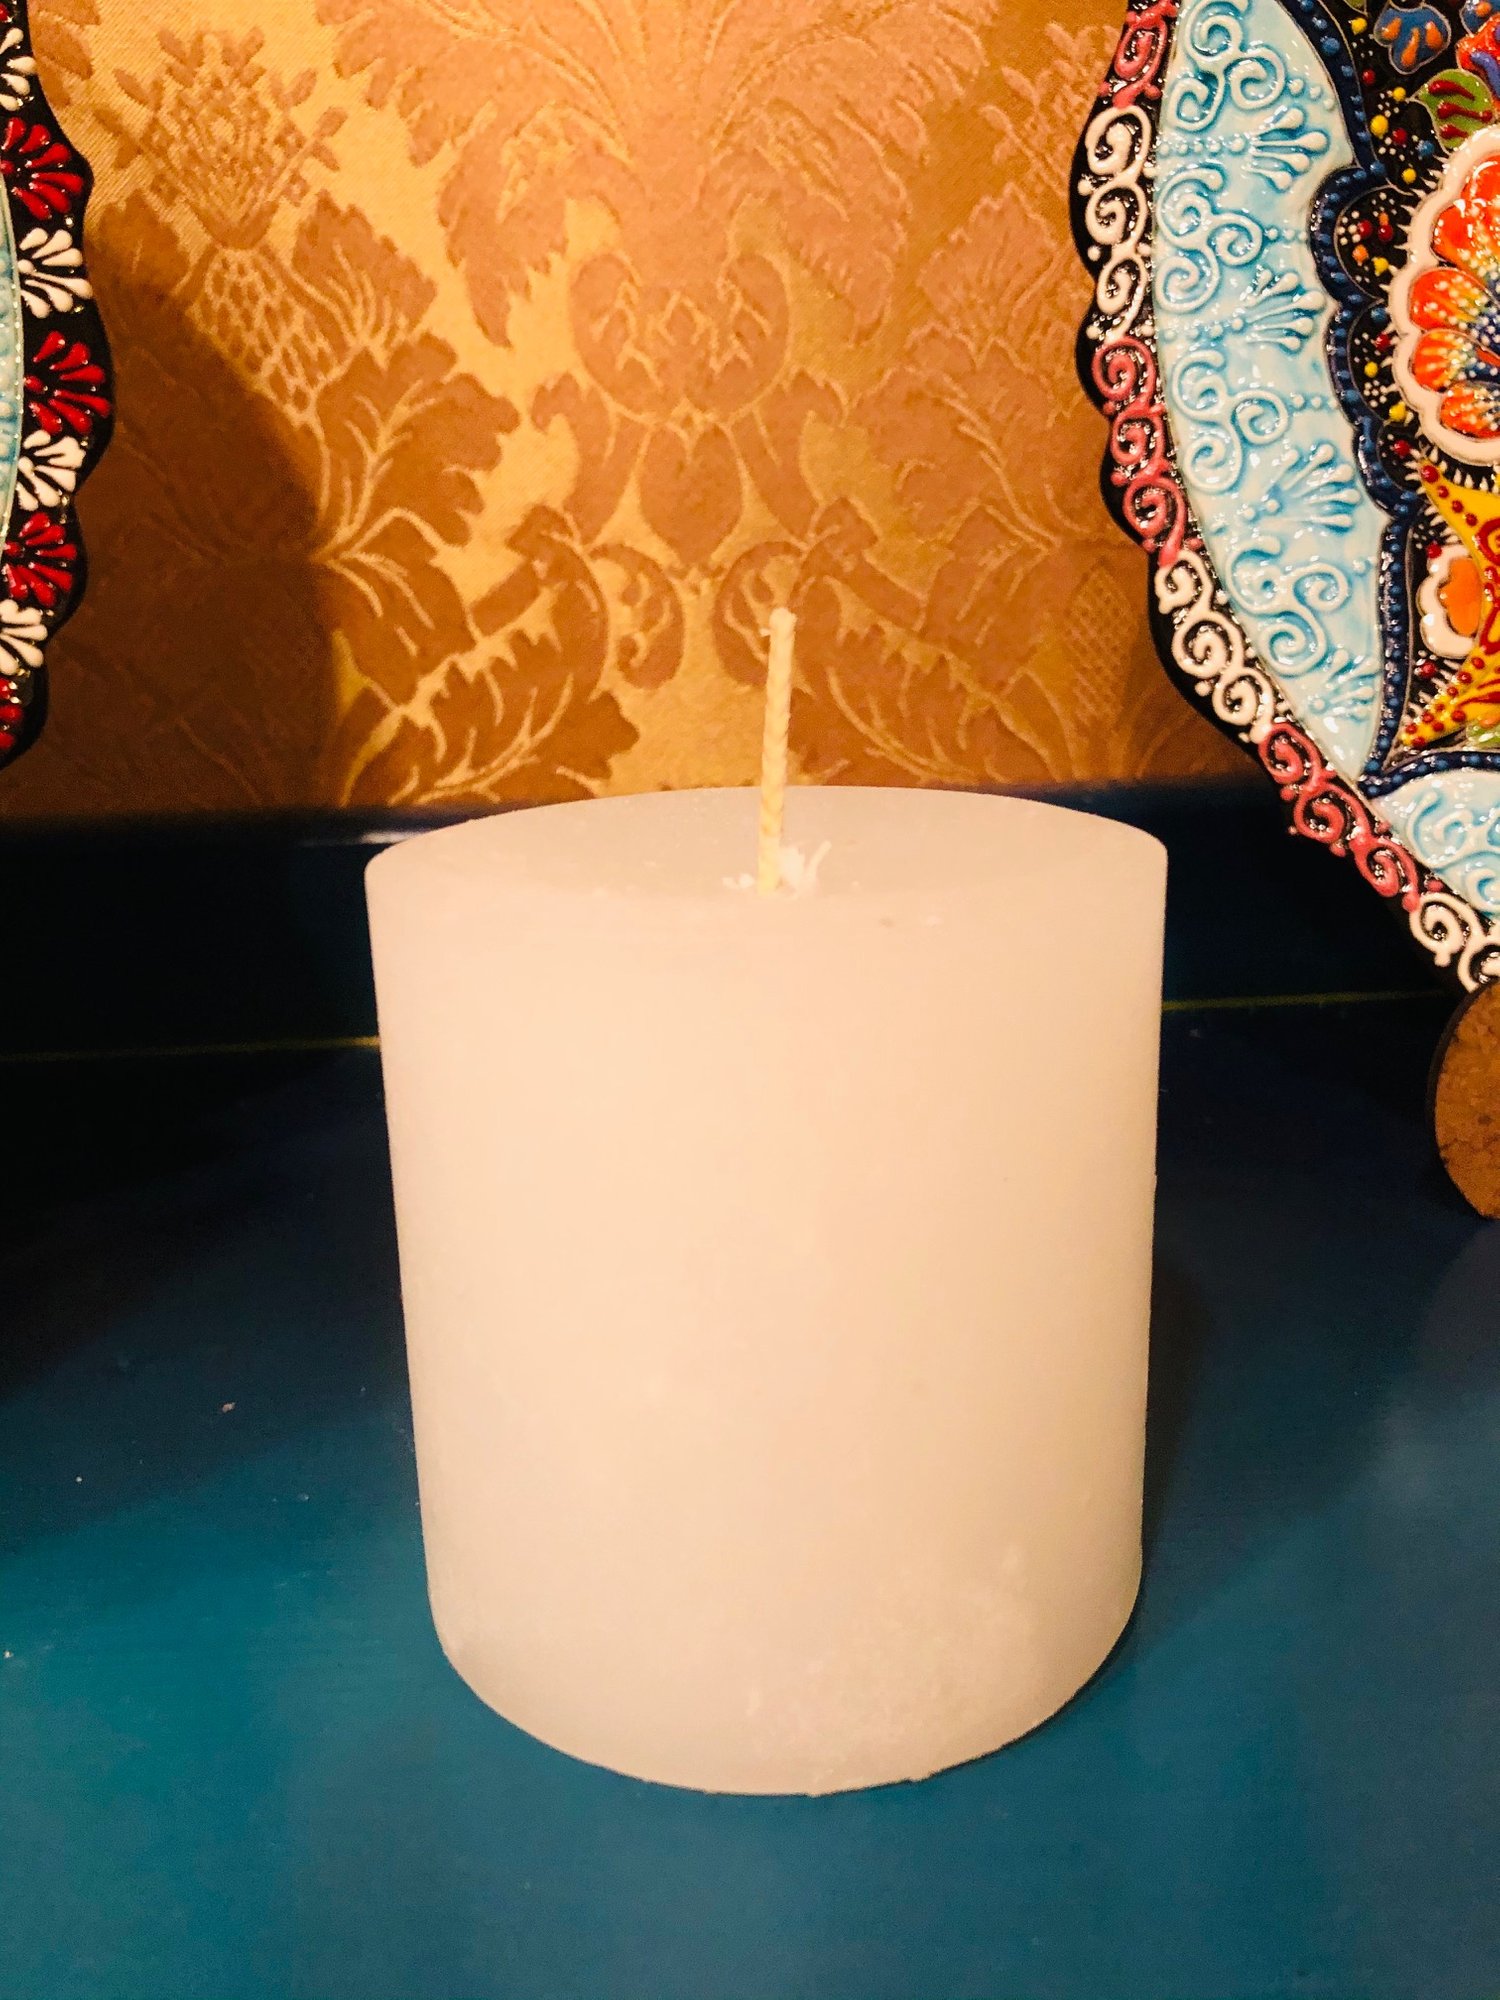 The Emergency Candle — Scentual Nature